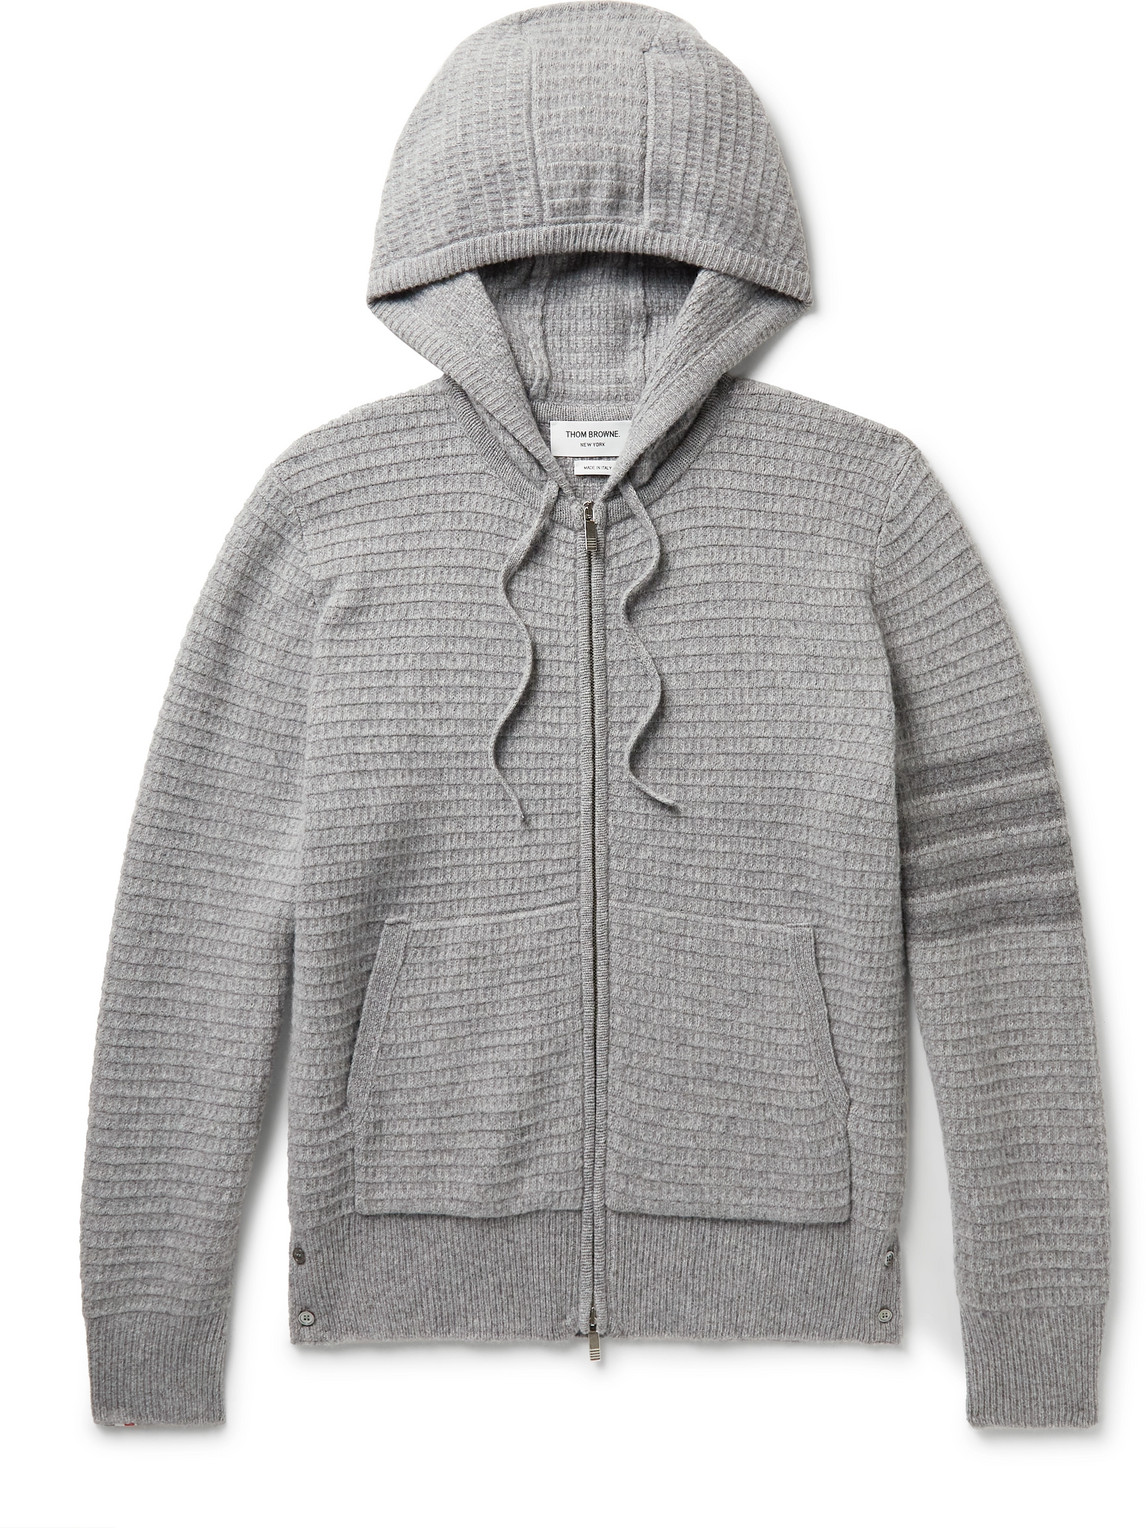 THOM BROWNE STRIPED TEXTURED WOOL AND CASHMERE-BLEND ZIP-UP HOODIE